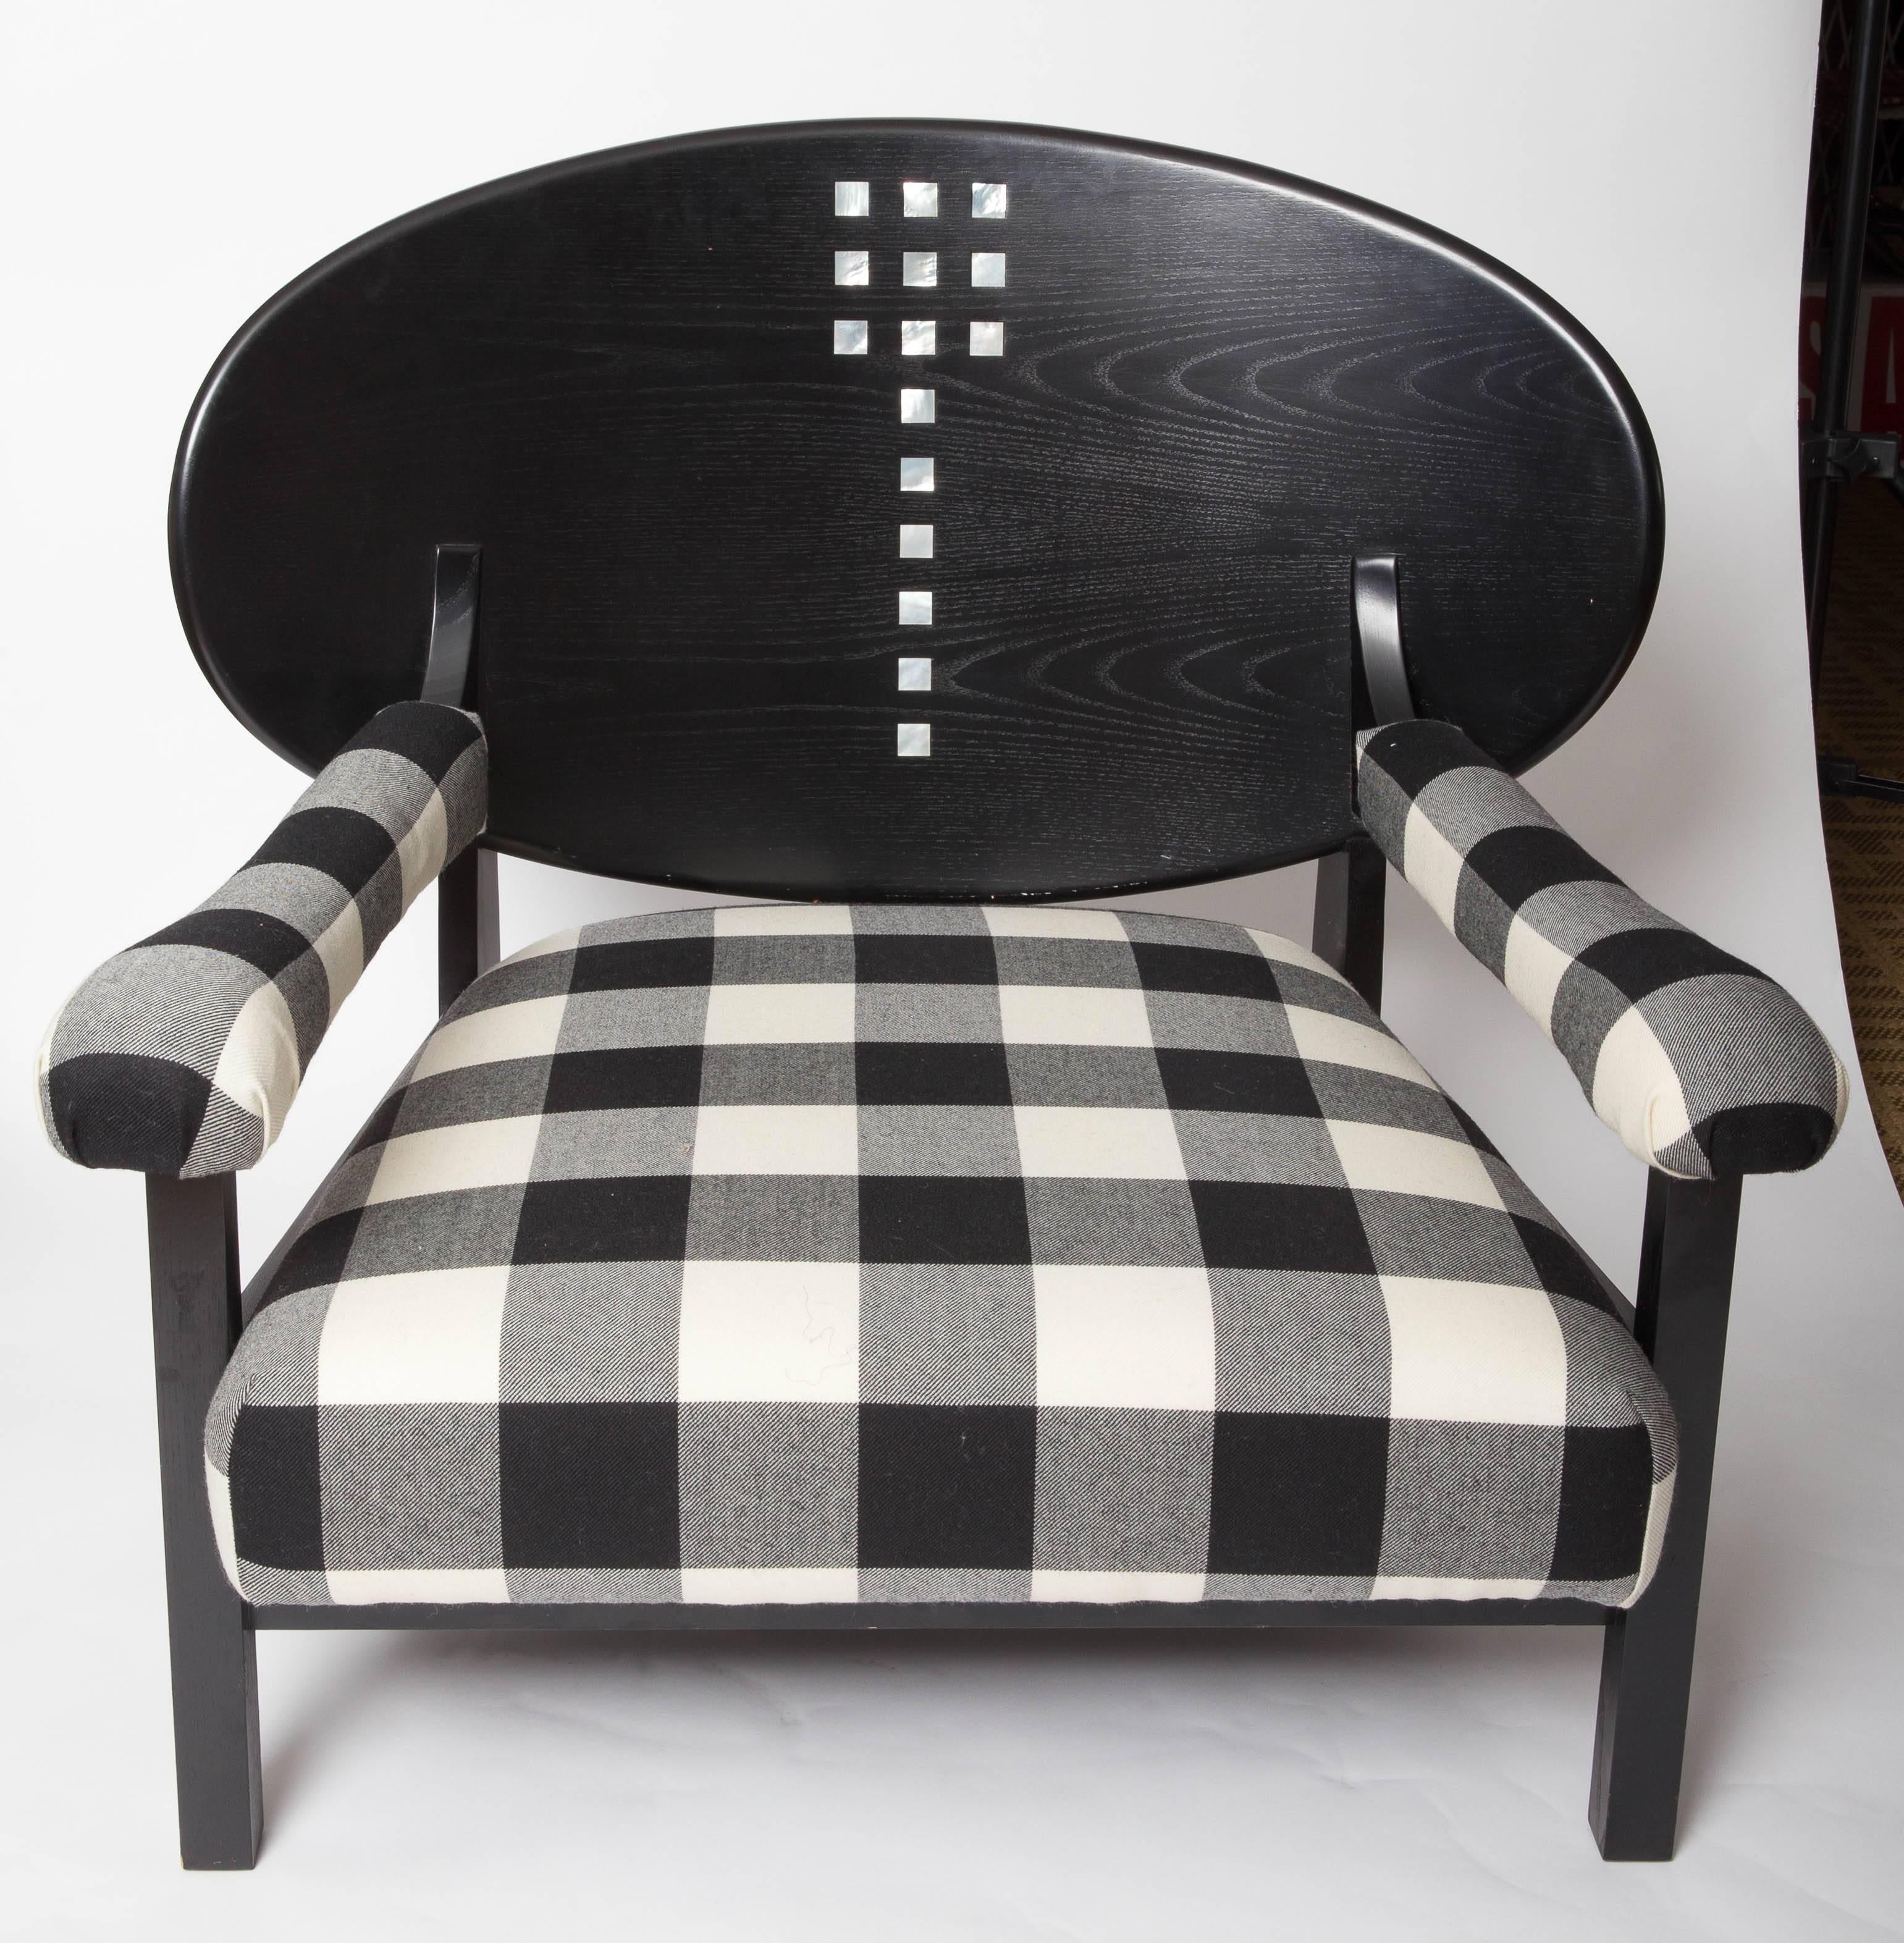 Newly Upholstered, reproduction of Charles Rennie Mackintosh Dugout chair.

